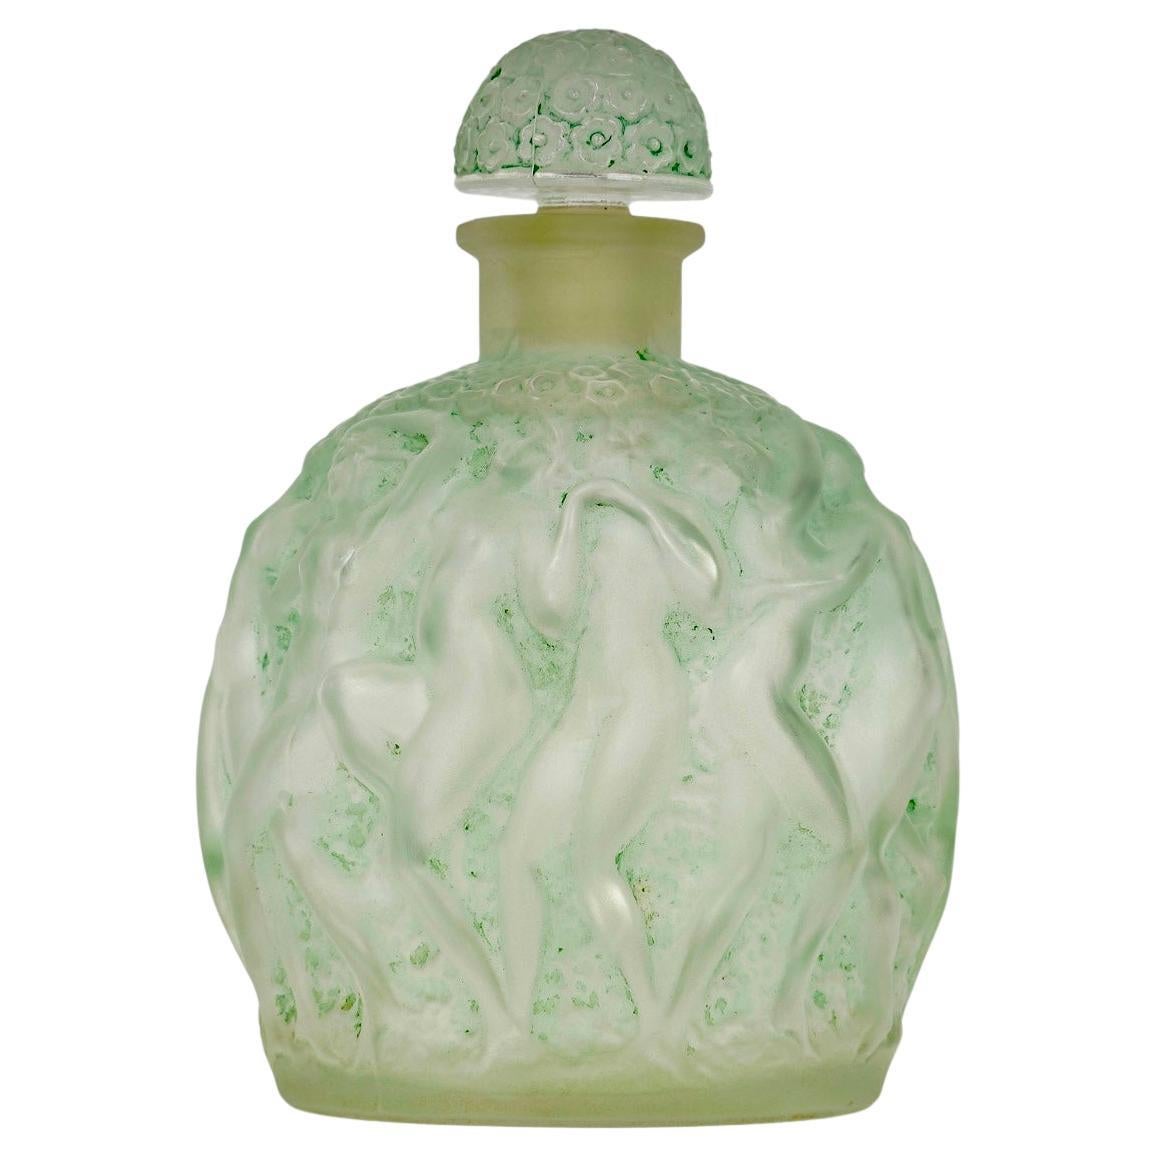 1937 Rene Lalique Perfume Bottle Calendal for Molinard Glass with Green Patina For Sale